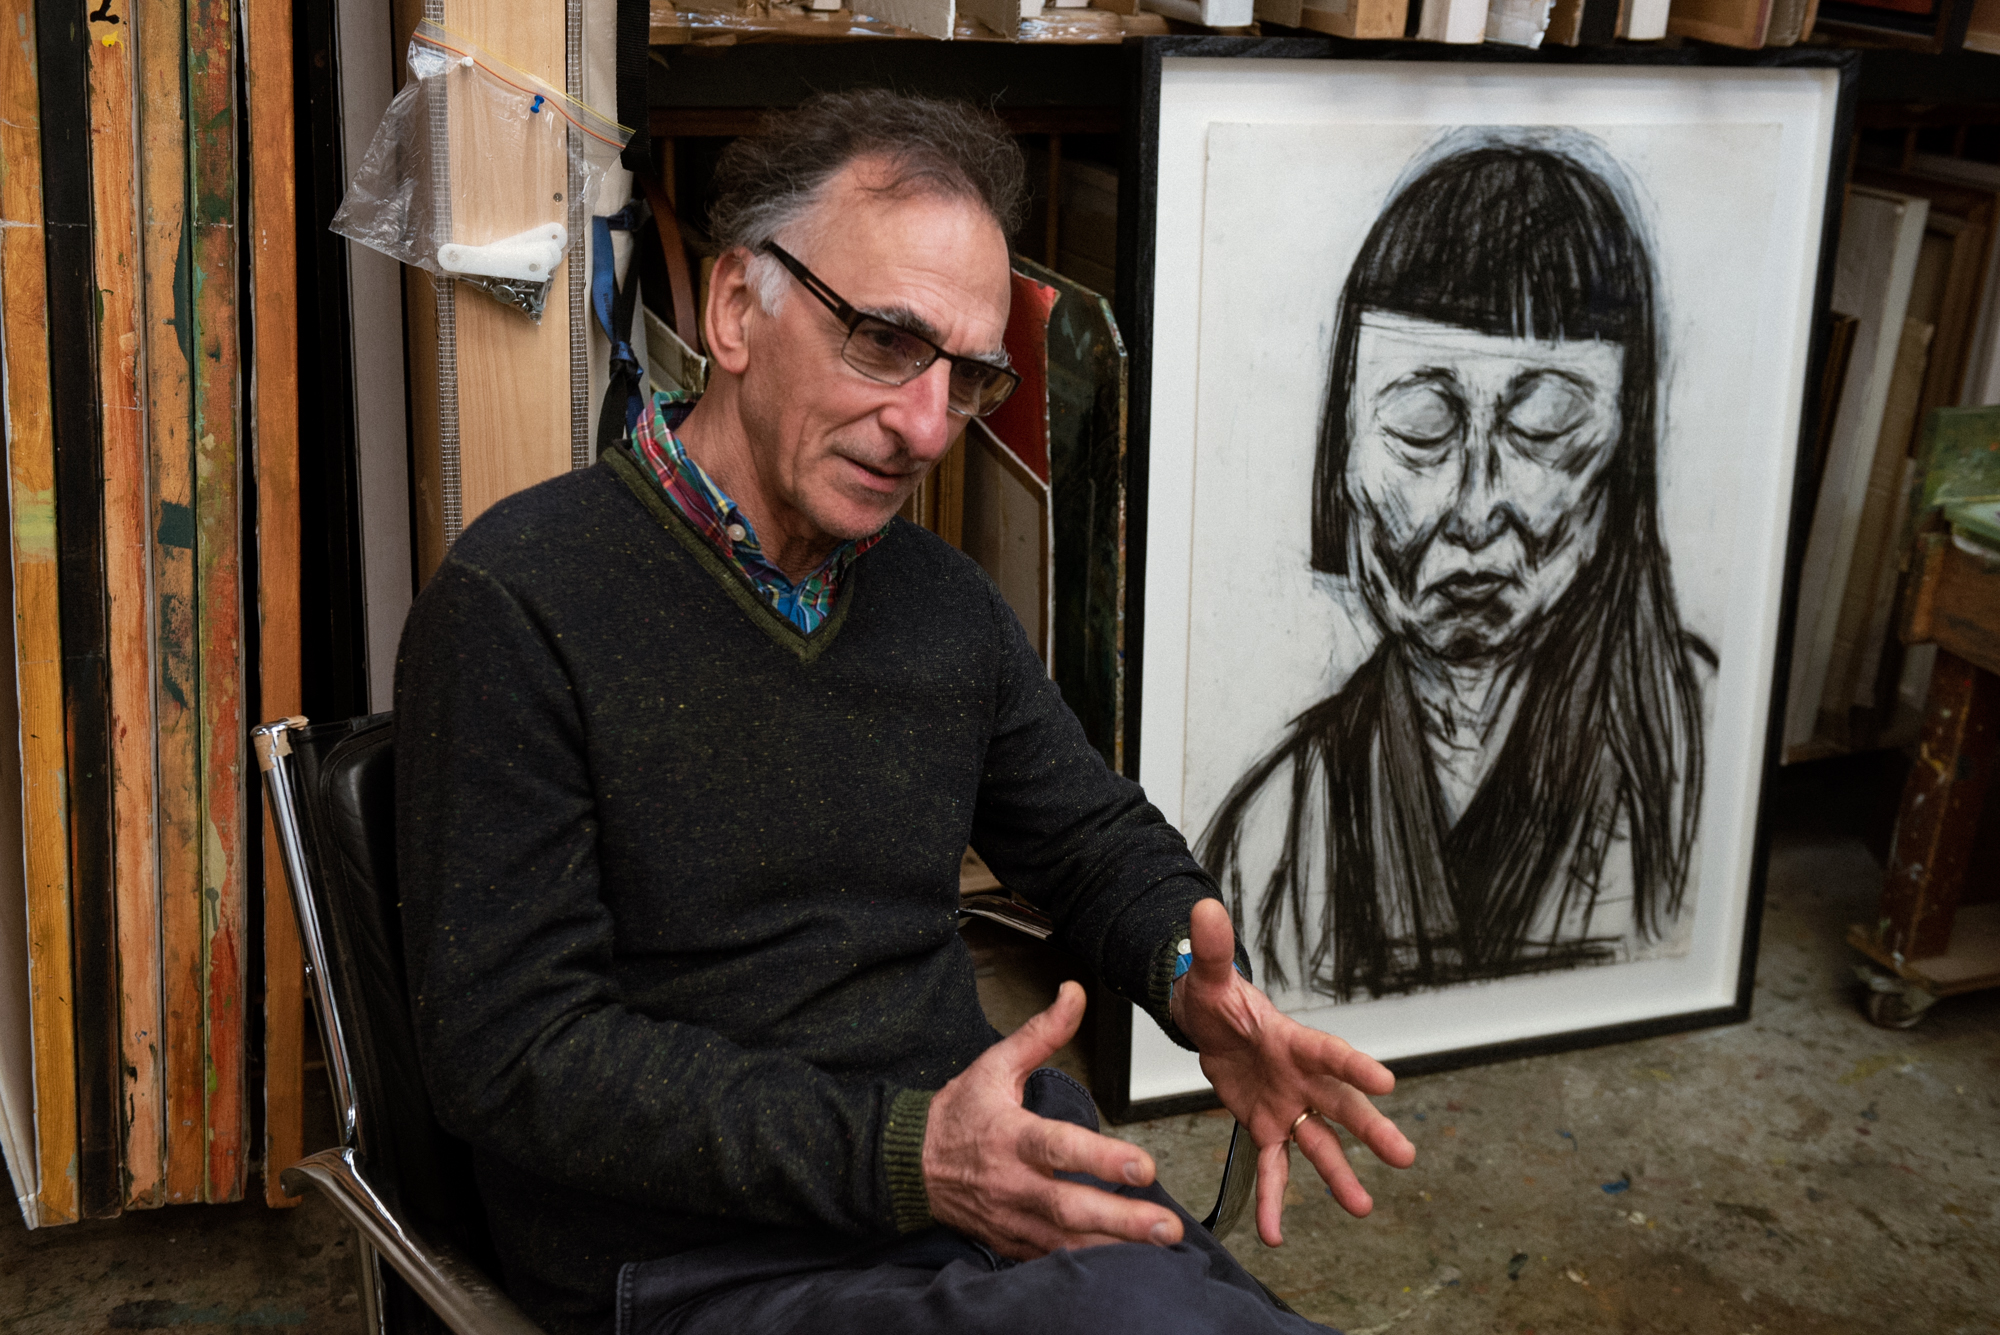 2019 Archibald Prize Winner Tony Costa on his portrait of Lindy Lee